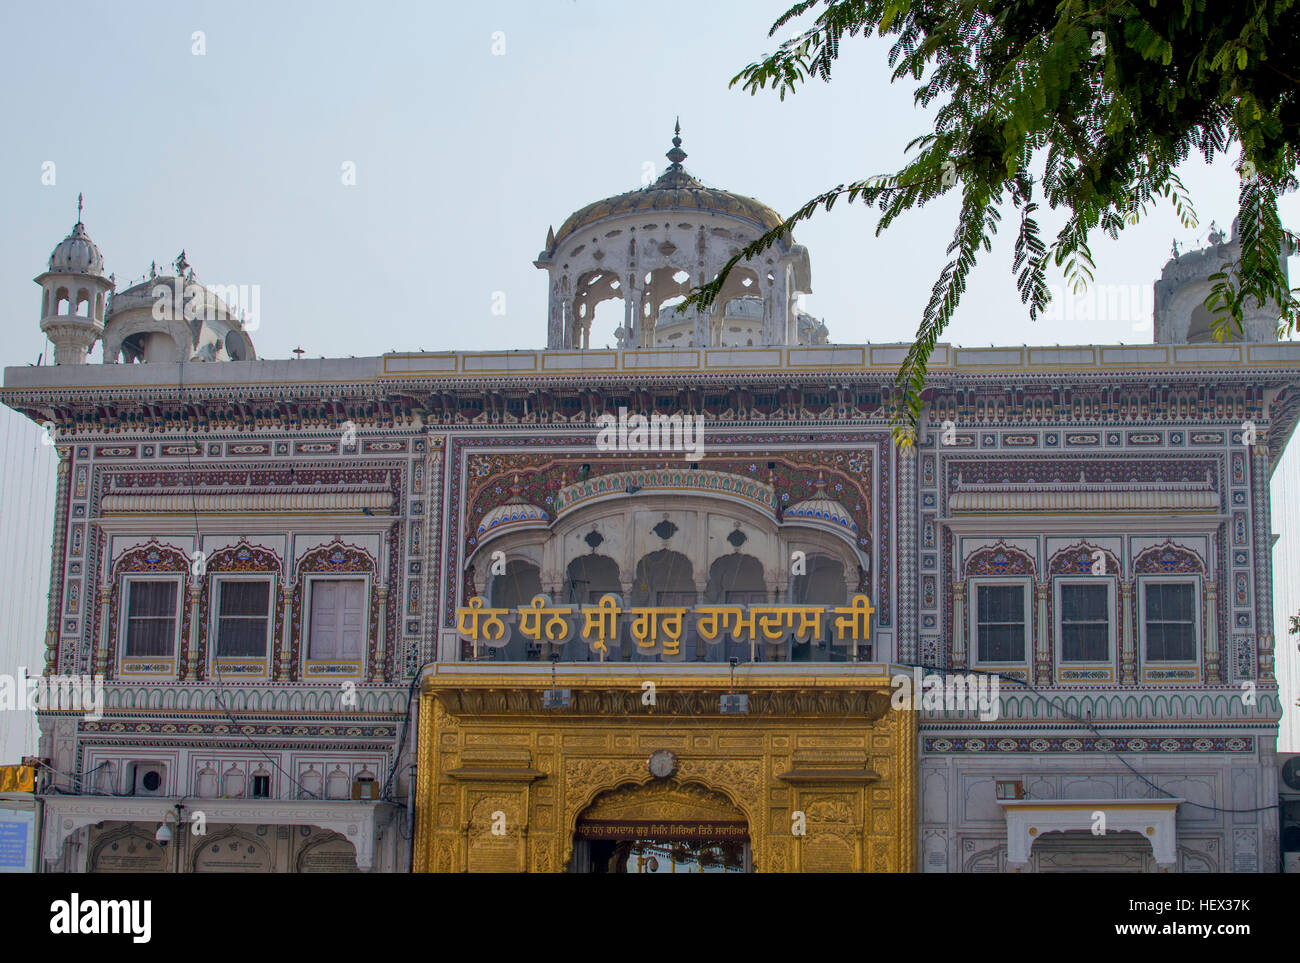 Architecture and place of interest of the city of Amritsar in India,a construction, amritsar, architecture, art, india, religion Stock Photo